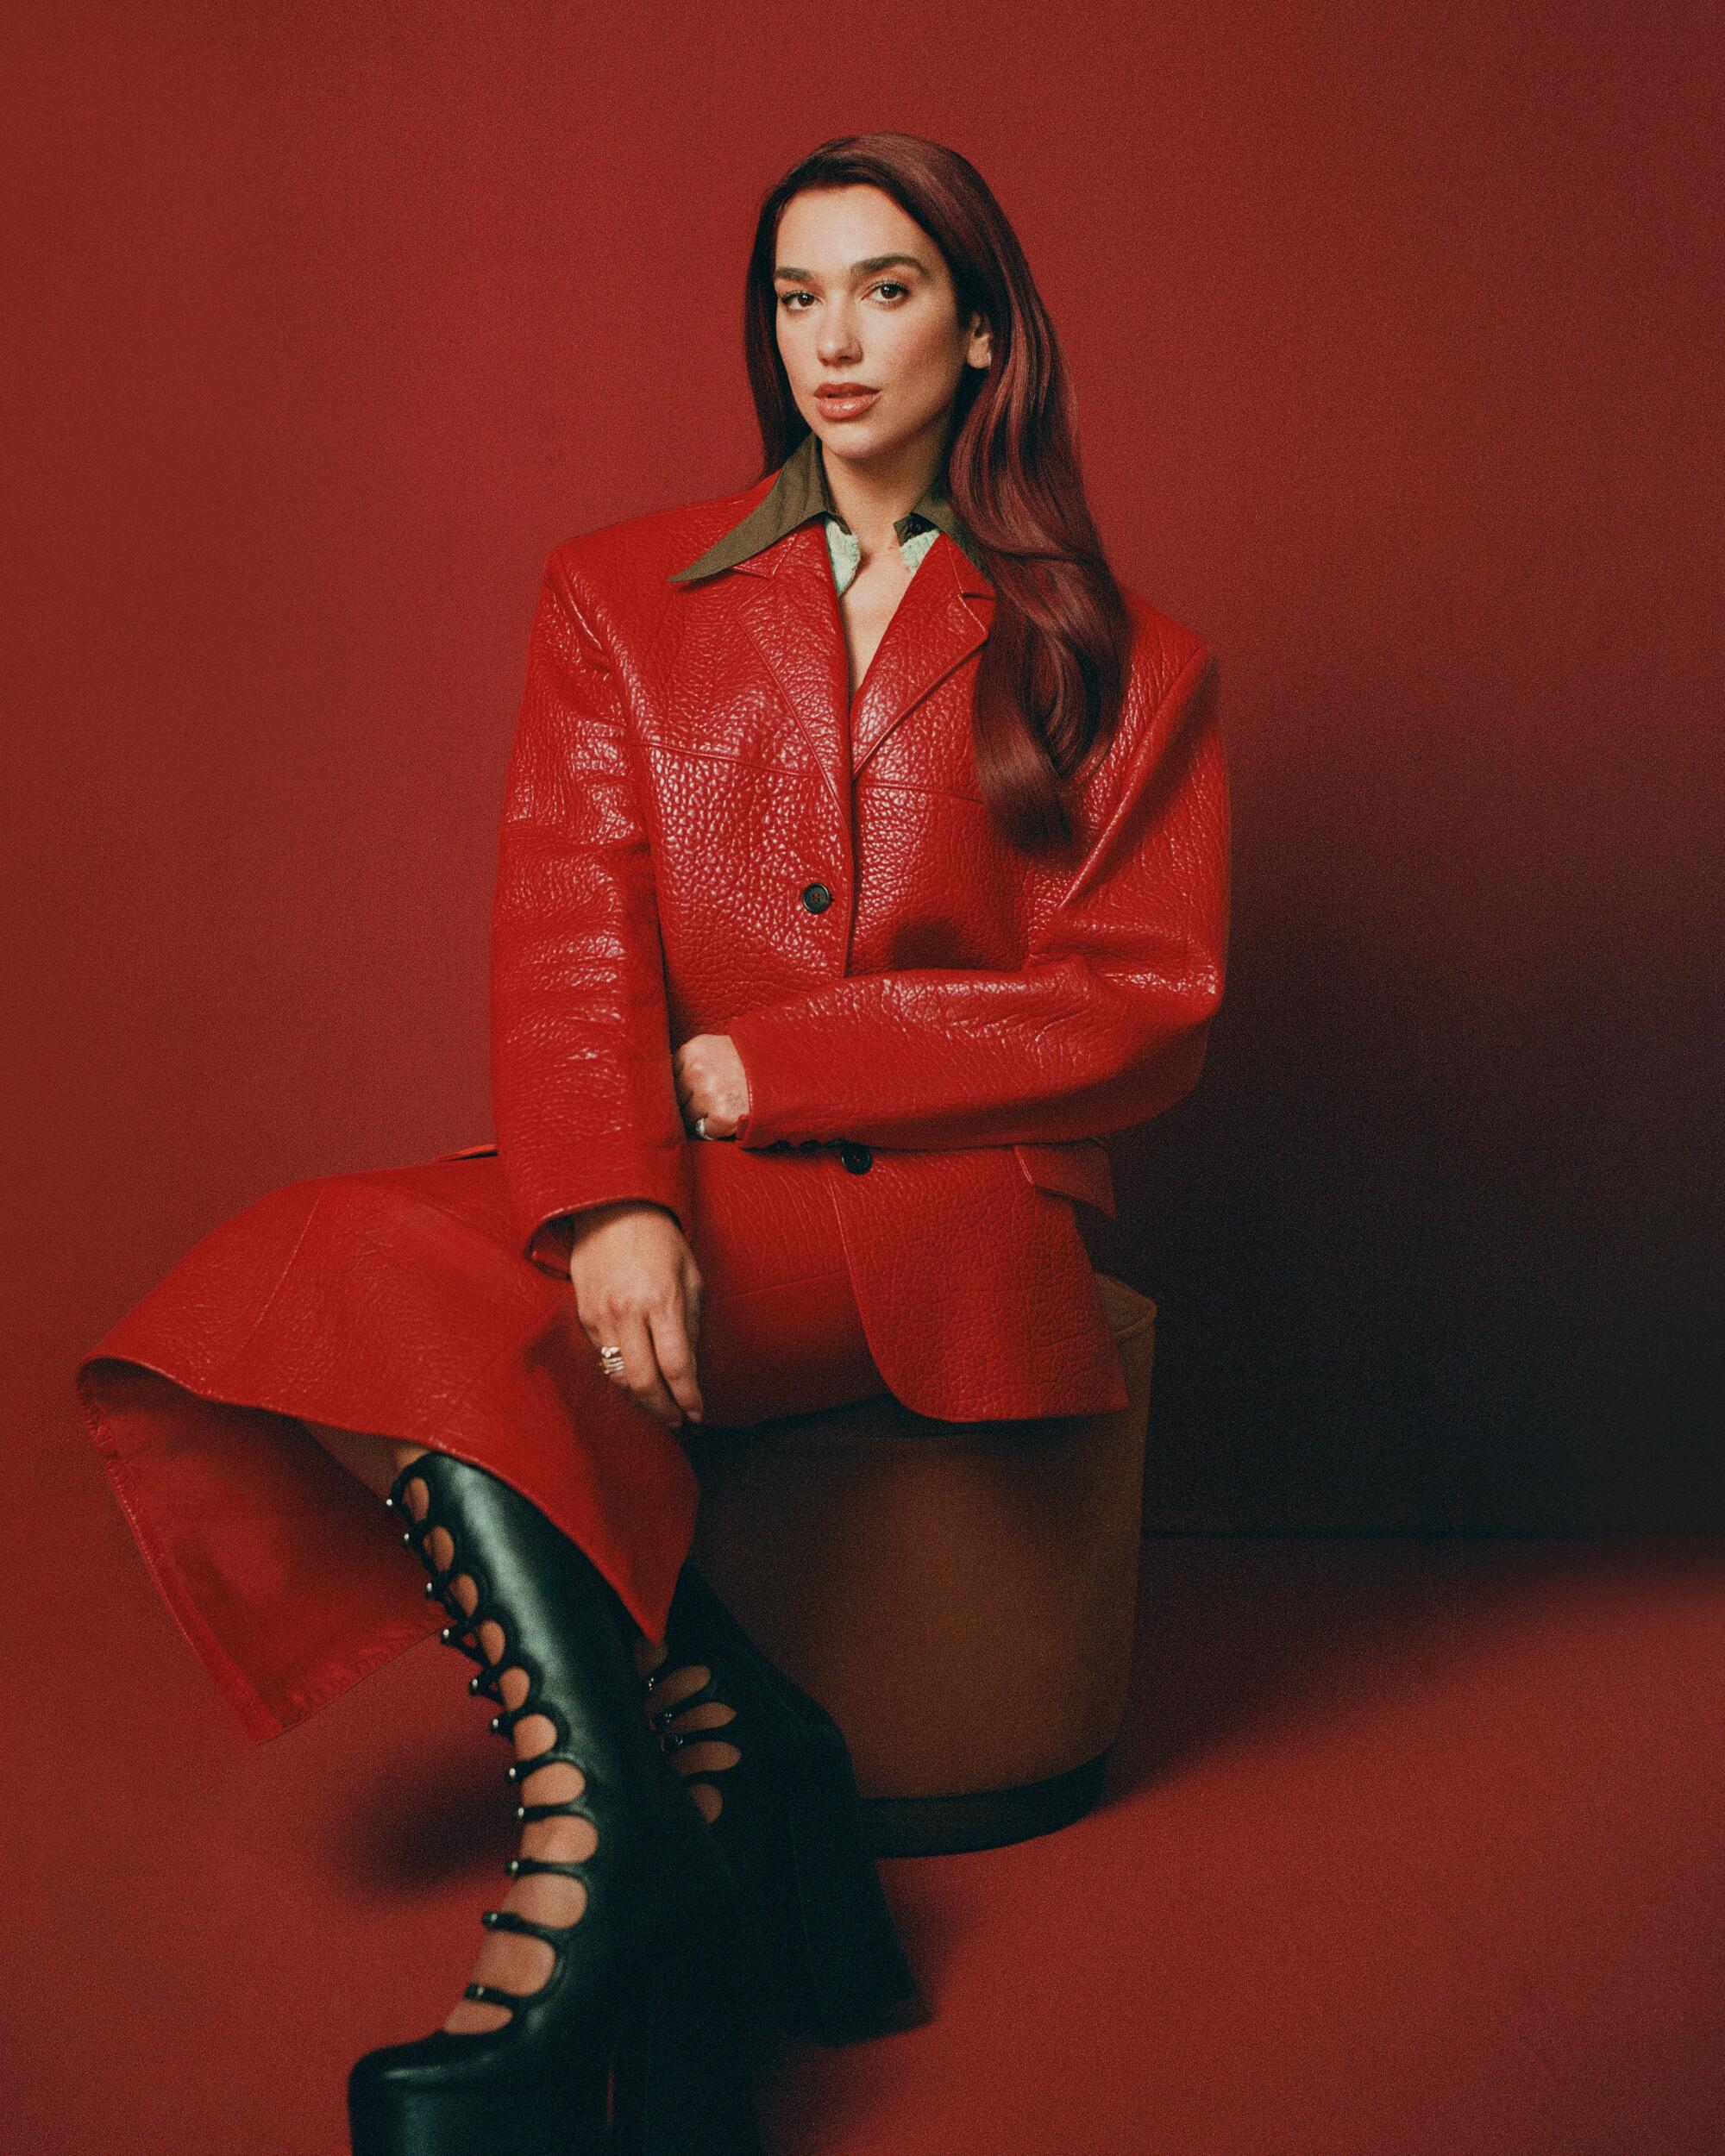 Dua Lipa wears a red outfit against a red backdrop with high cut-out boots.